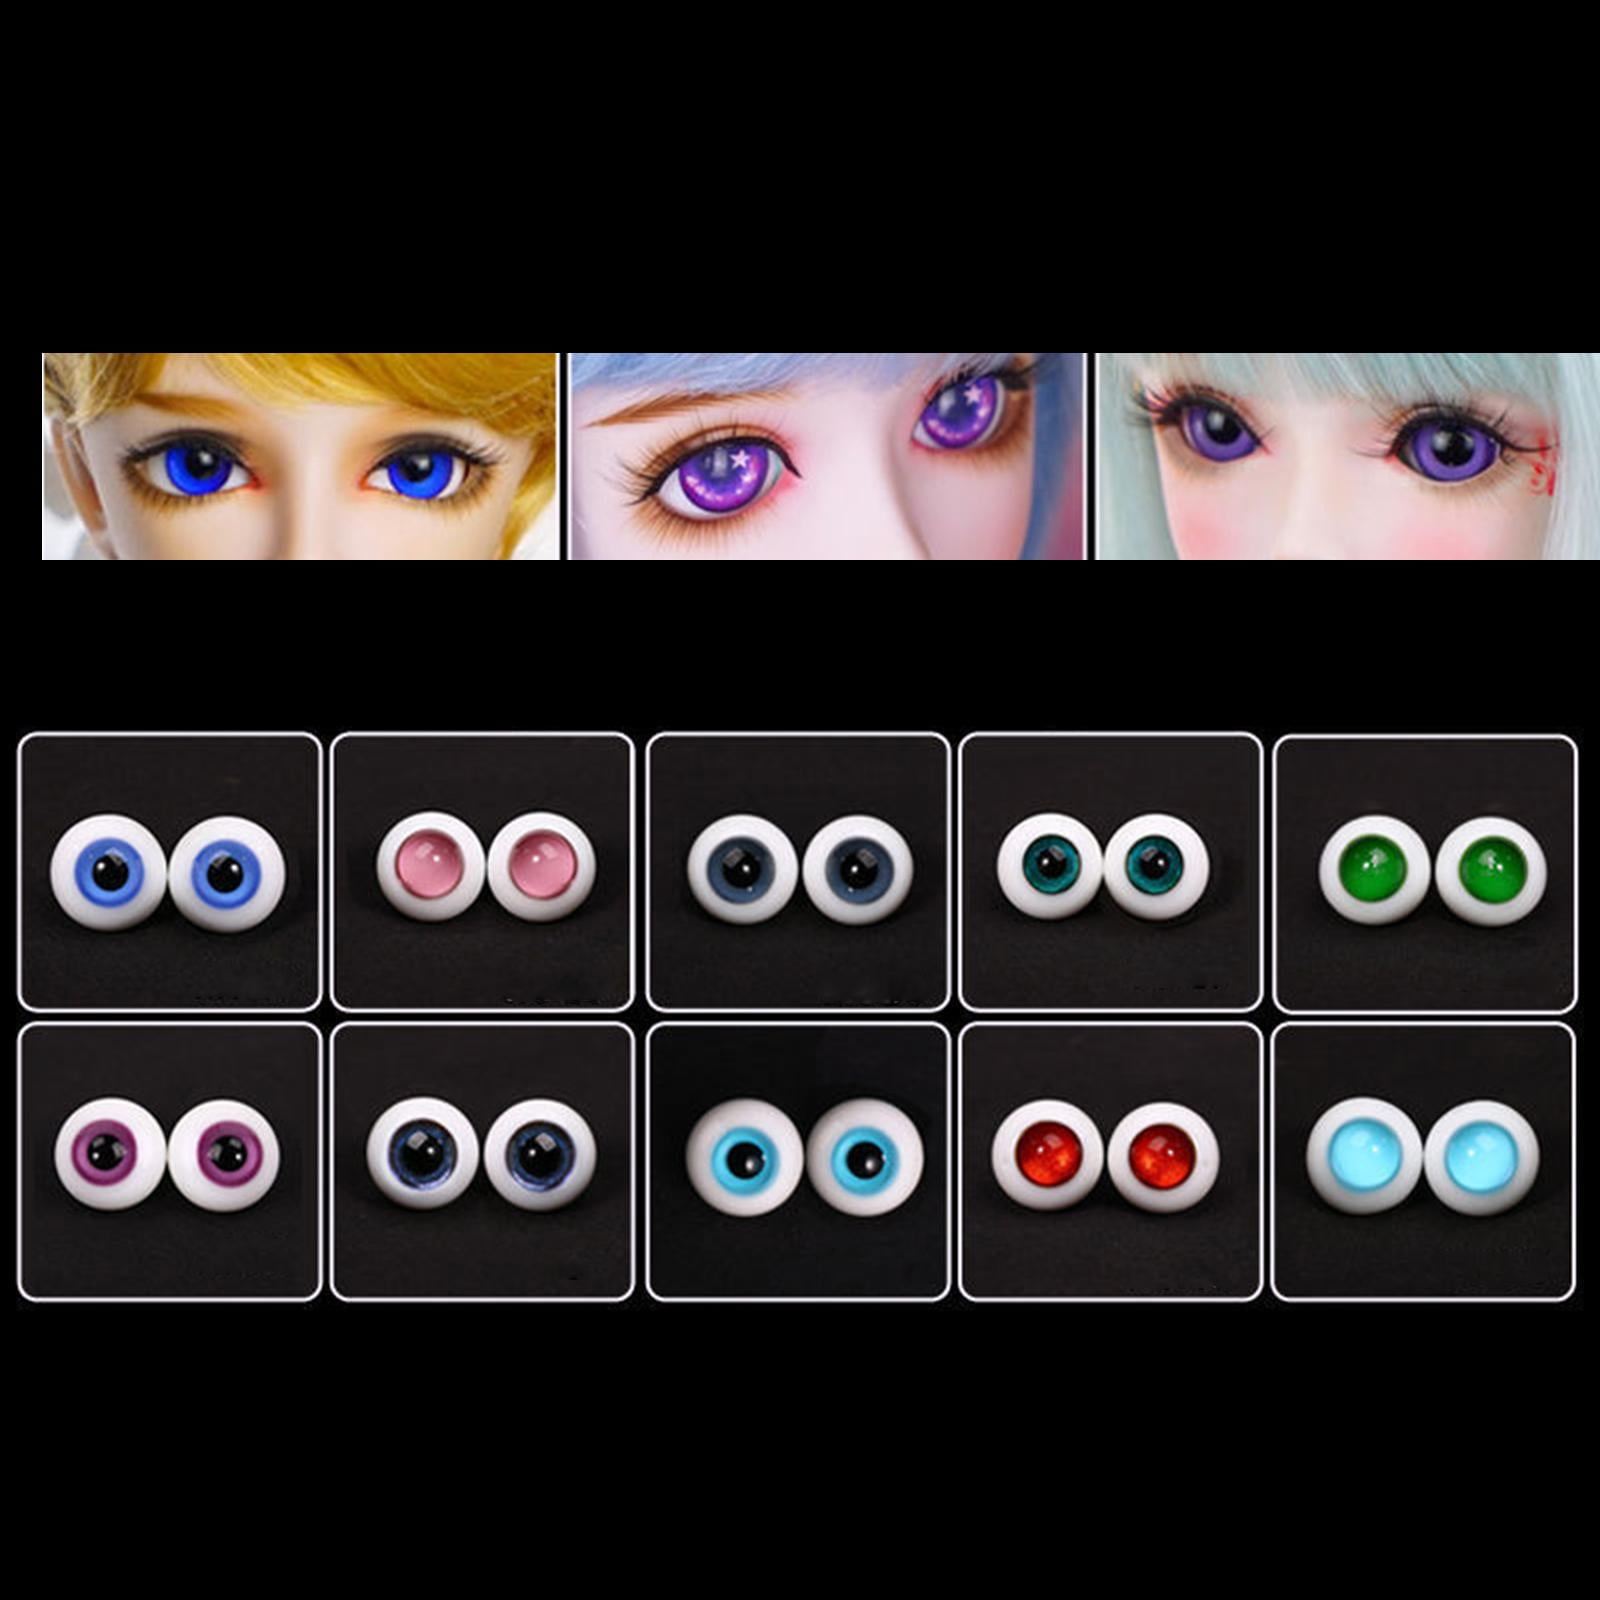 2x Realistic Doll Eyes, Wiggle Eyes (6 Mm) Accessories, Movable, Art  Eyeball for Doll Making Supplies DIY Stuffed Animals Sculpture , Pink Pink